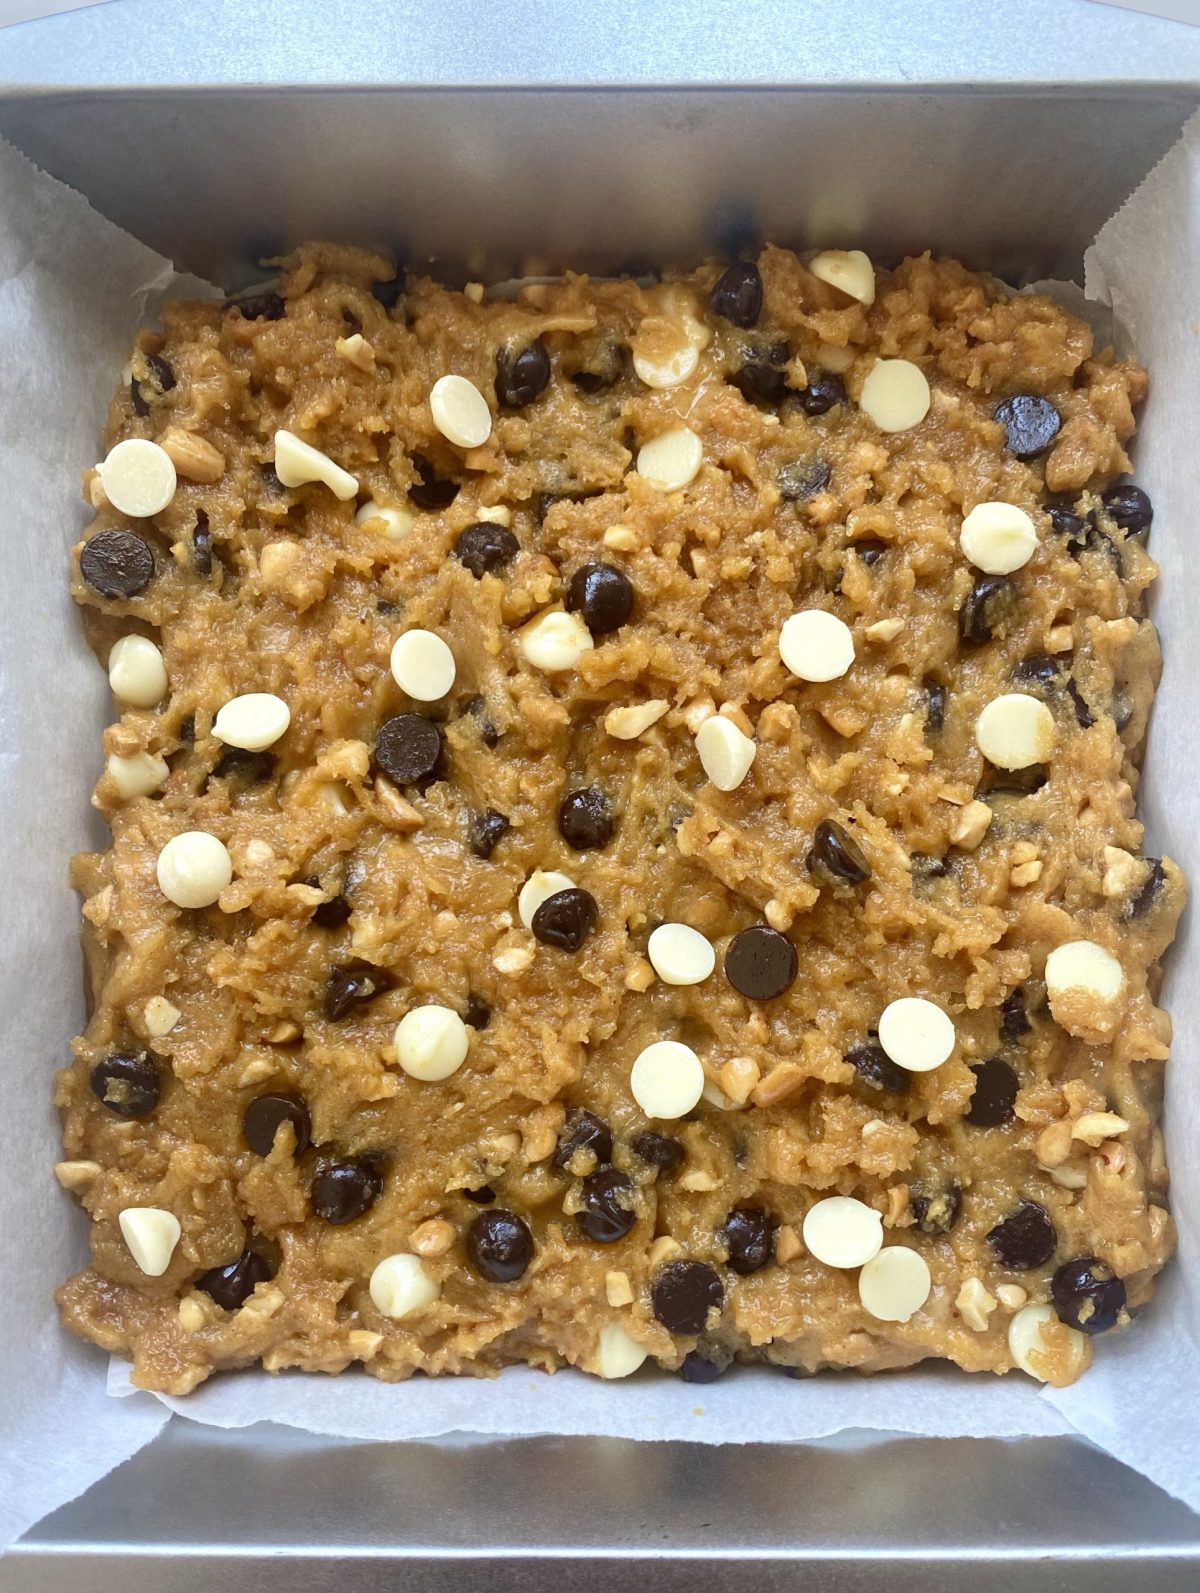 Unbaked peanut butter chocolate chip bars in a metal pan.